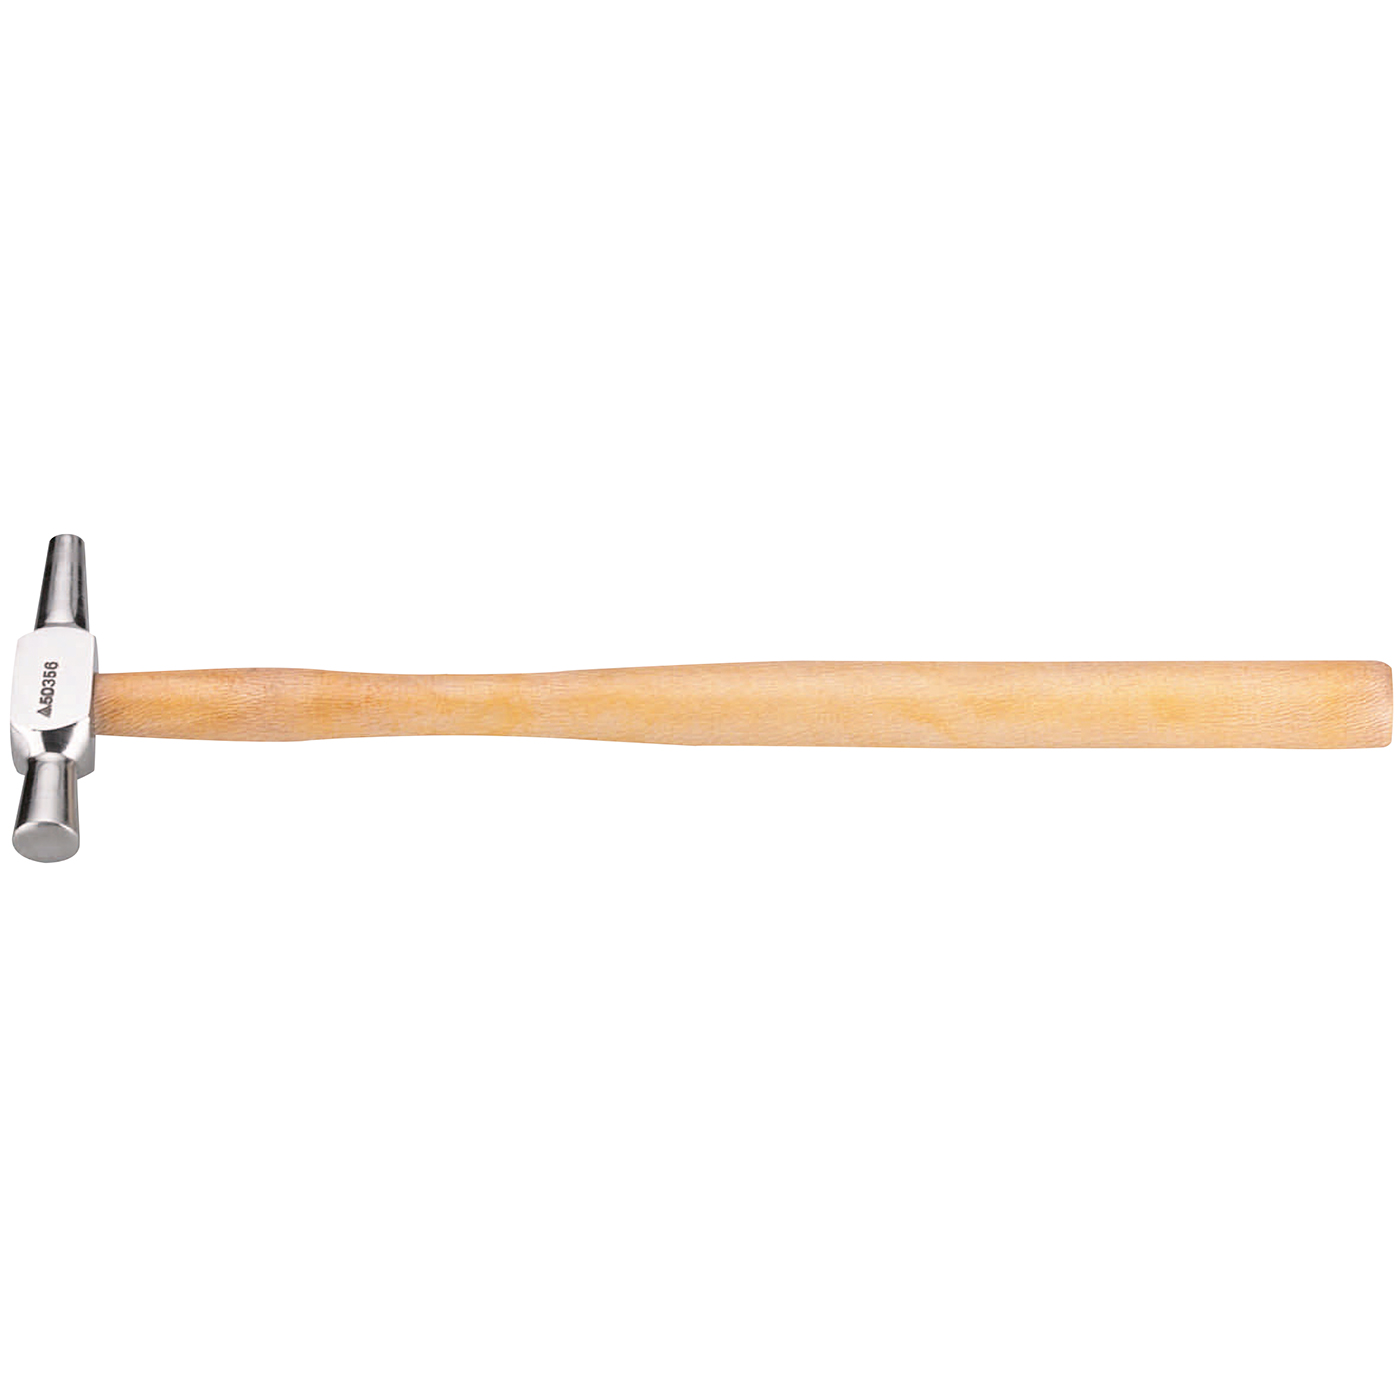 FINO Riveting Hammer, Wooden Handle, Pointed, 250 mm - 1 piece